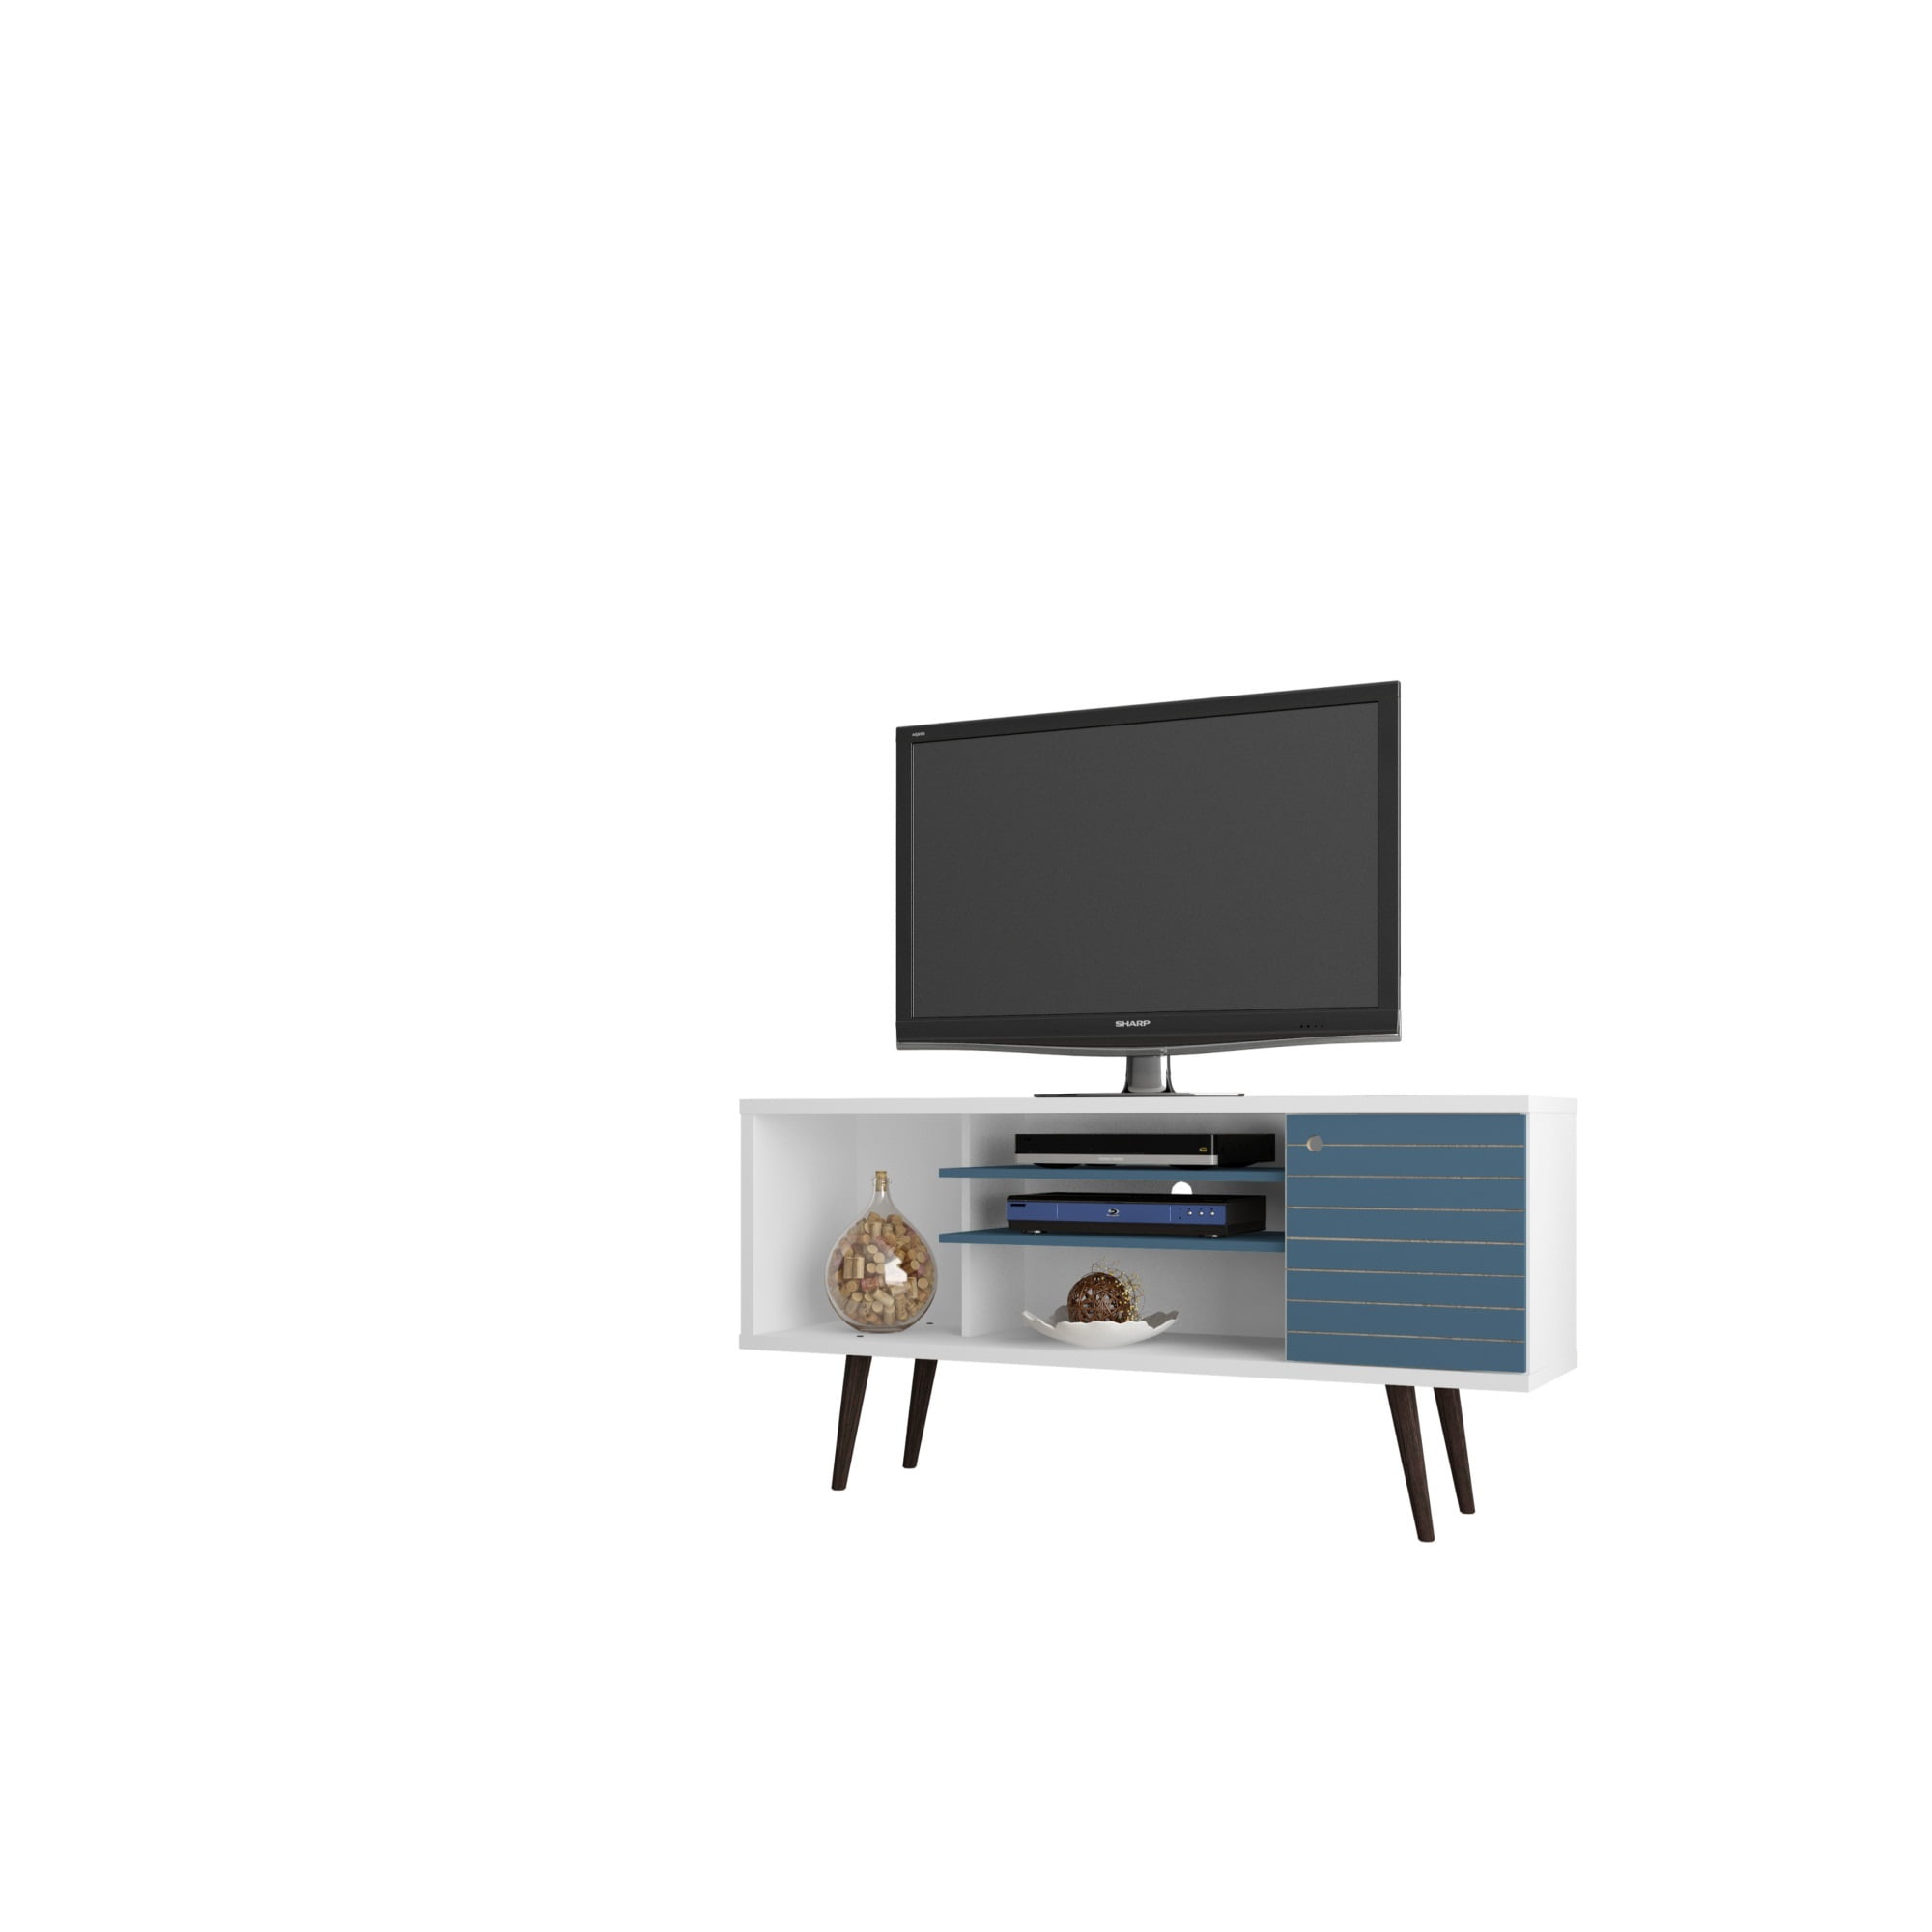 Manhattan Comfort Liberty Collection Mid Century Modern TV Stand in Wood/Blue 